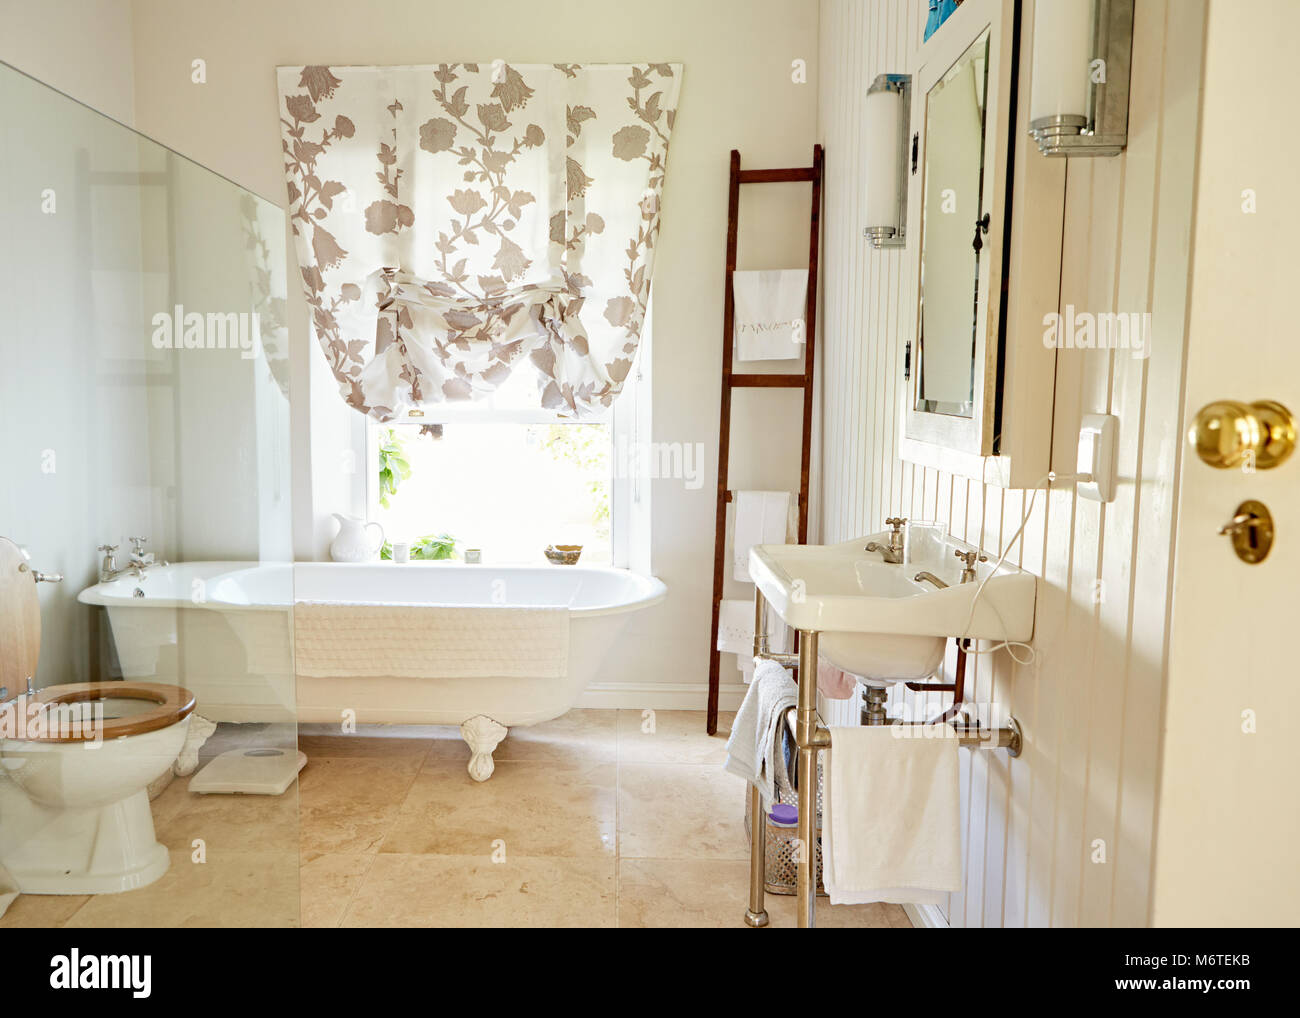 Interior of a spacious country style bathroom Stock Photo